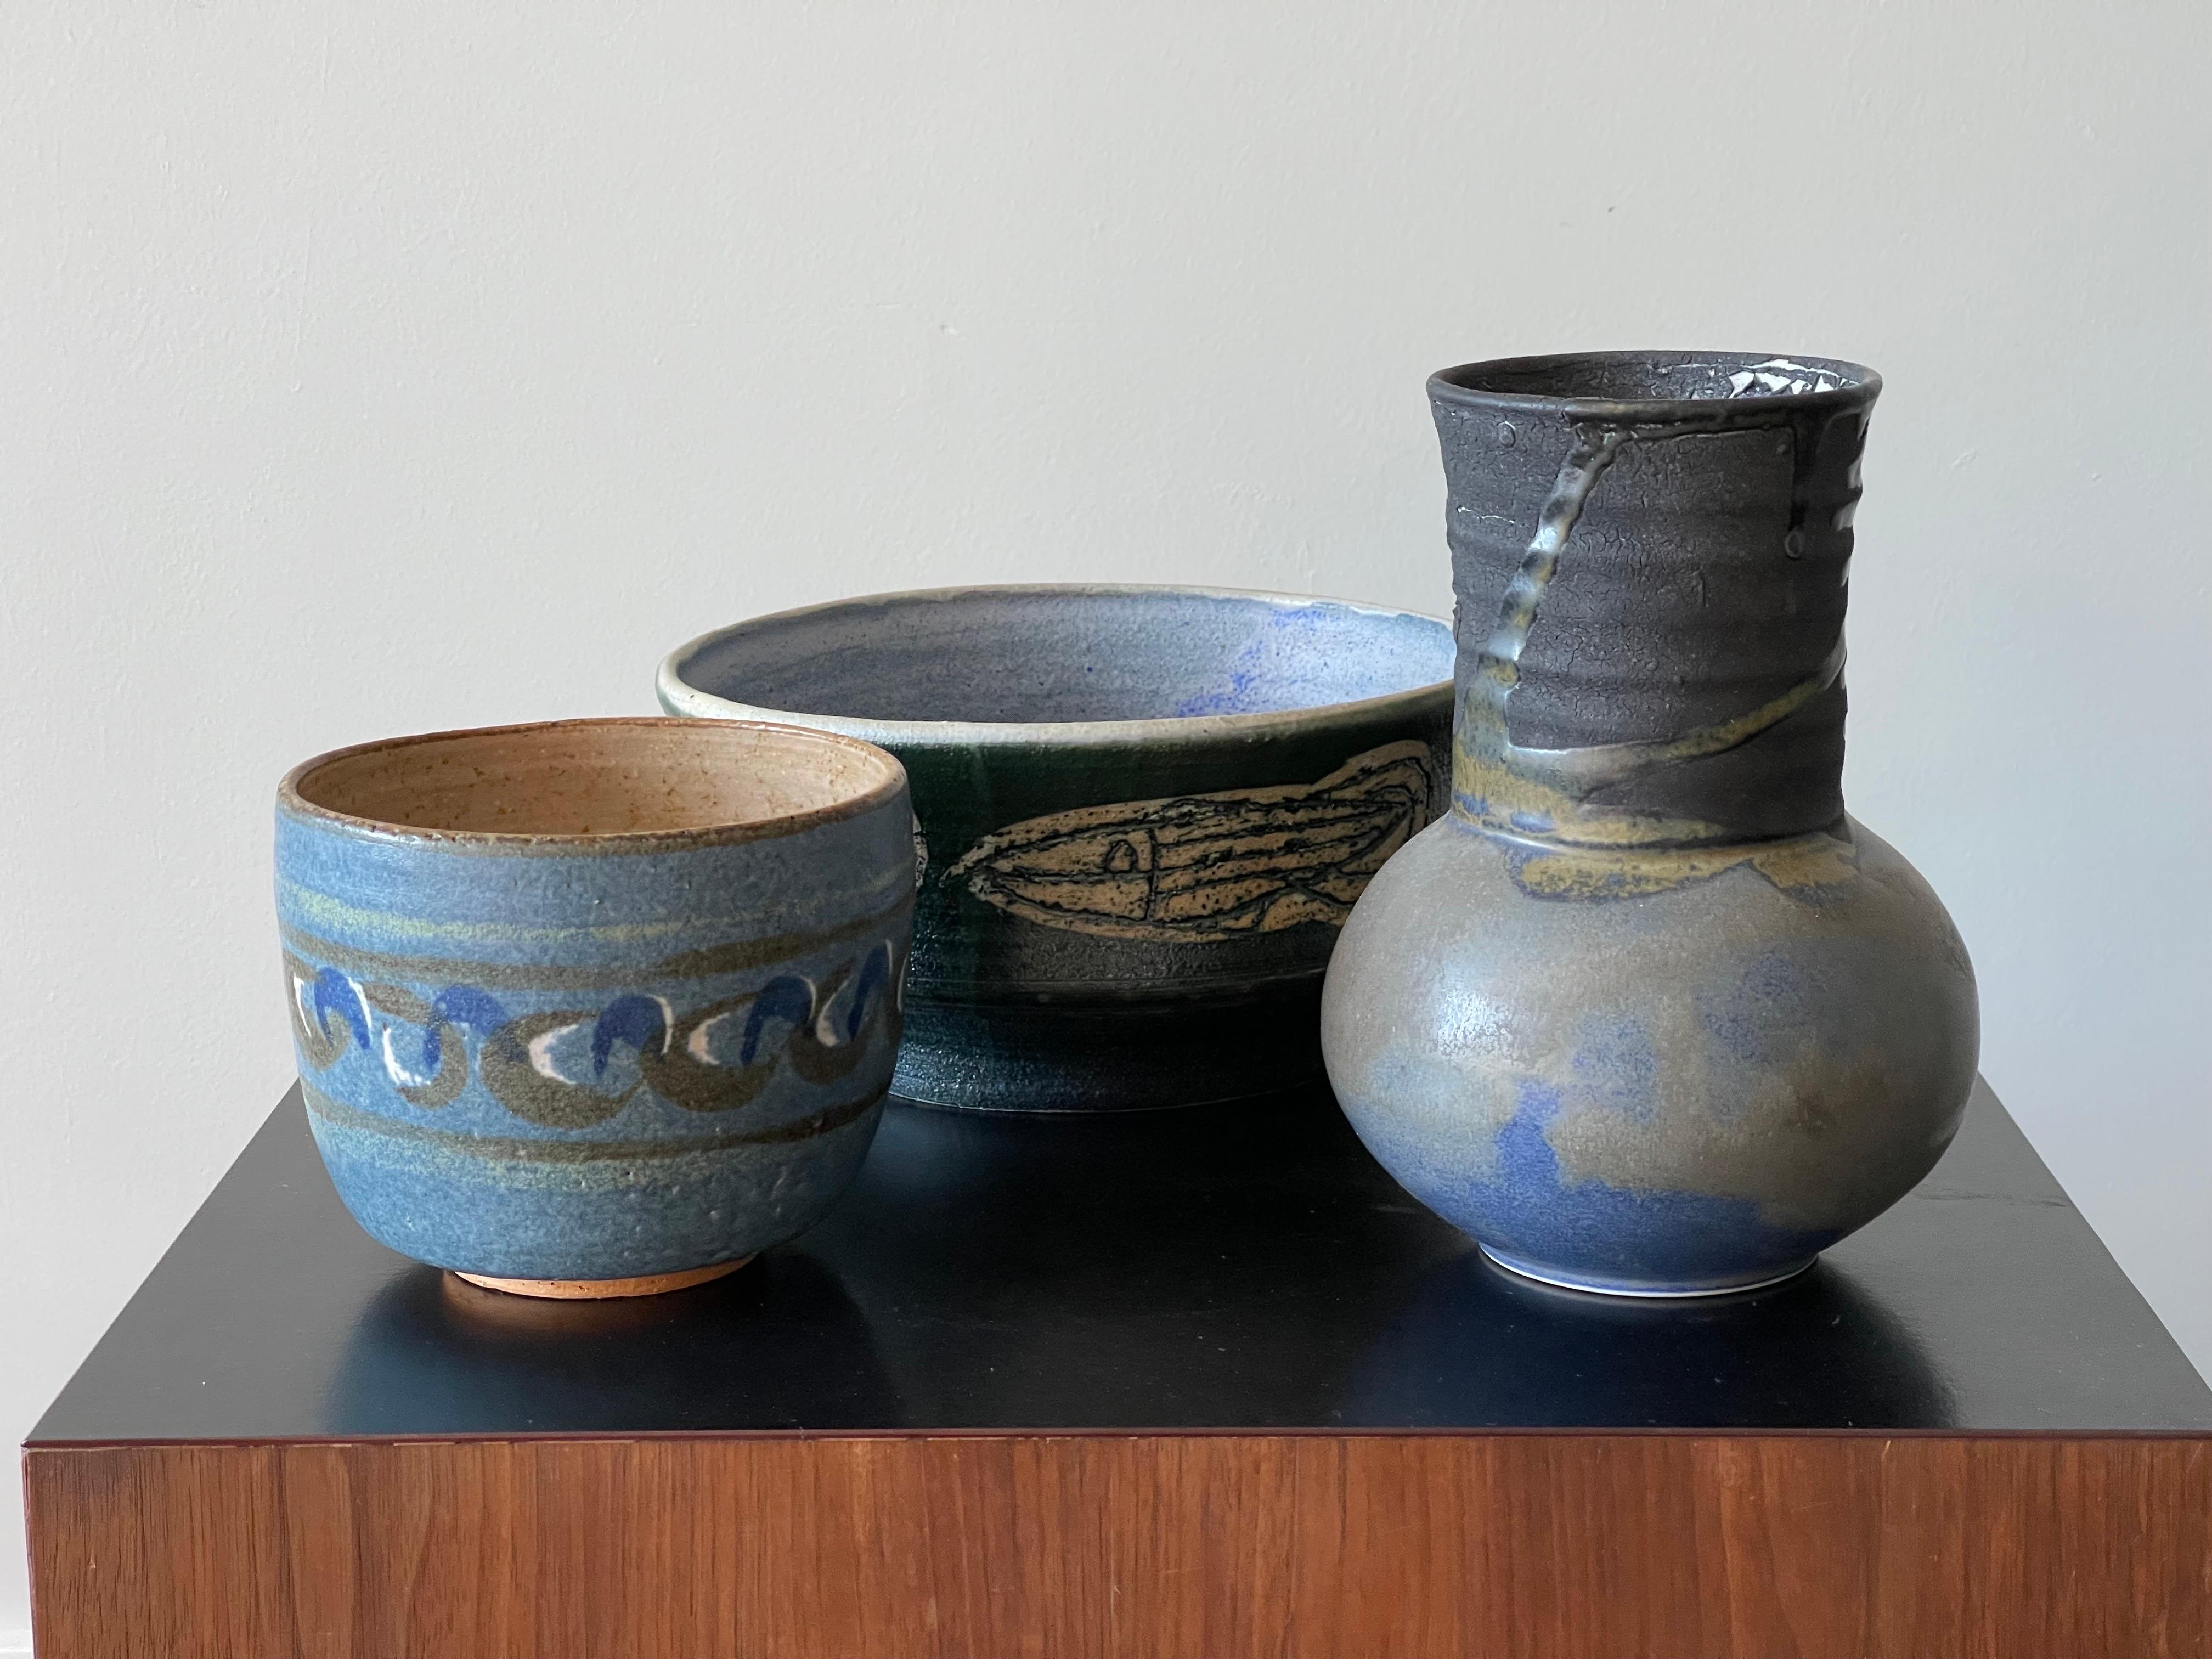 Lovely collection of Mid-Century Modern pottery. Two bowls by listed Regional Florida artists and a Raku vase by a Swedish artist ranging from 1961-1977. The Raku vase shows peeling on the inside but that was done in the firing process and is